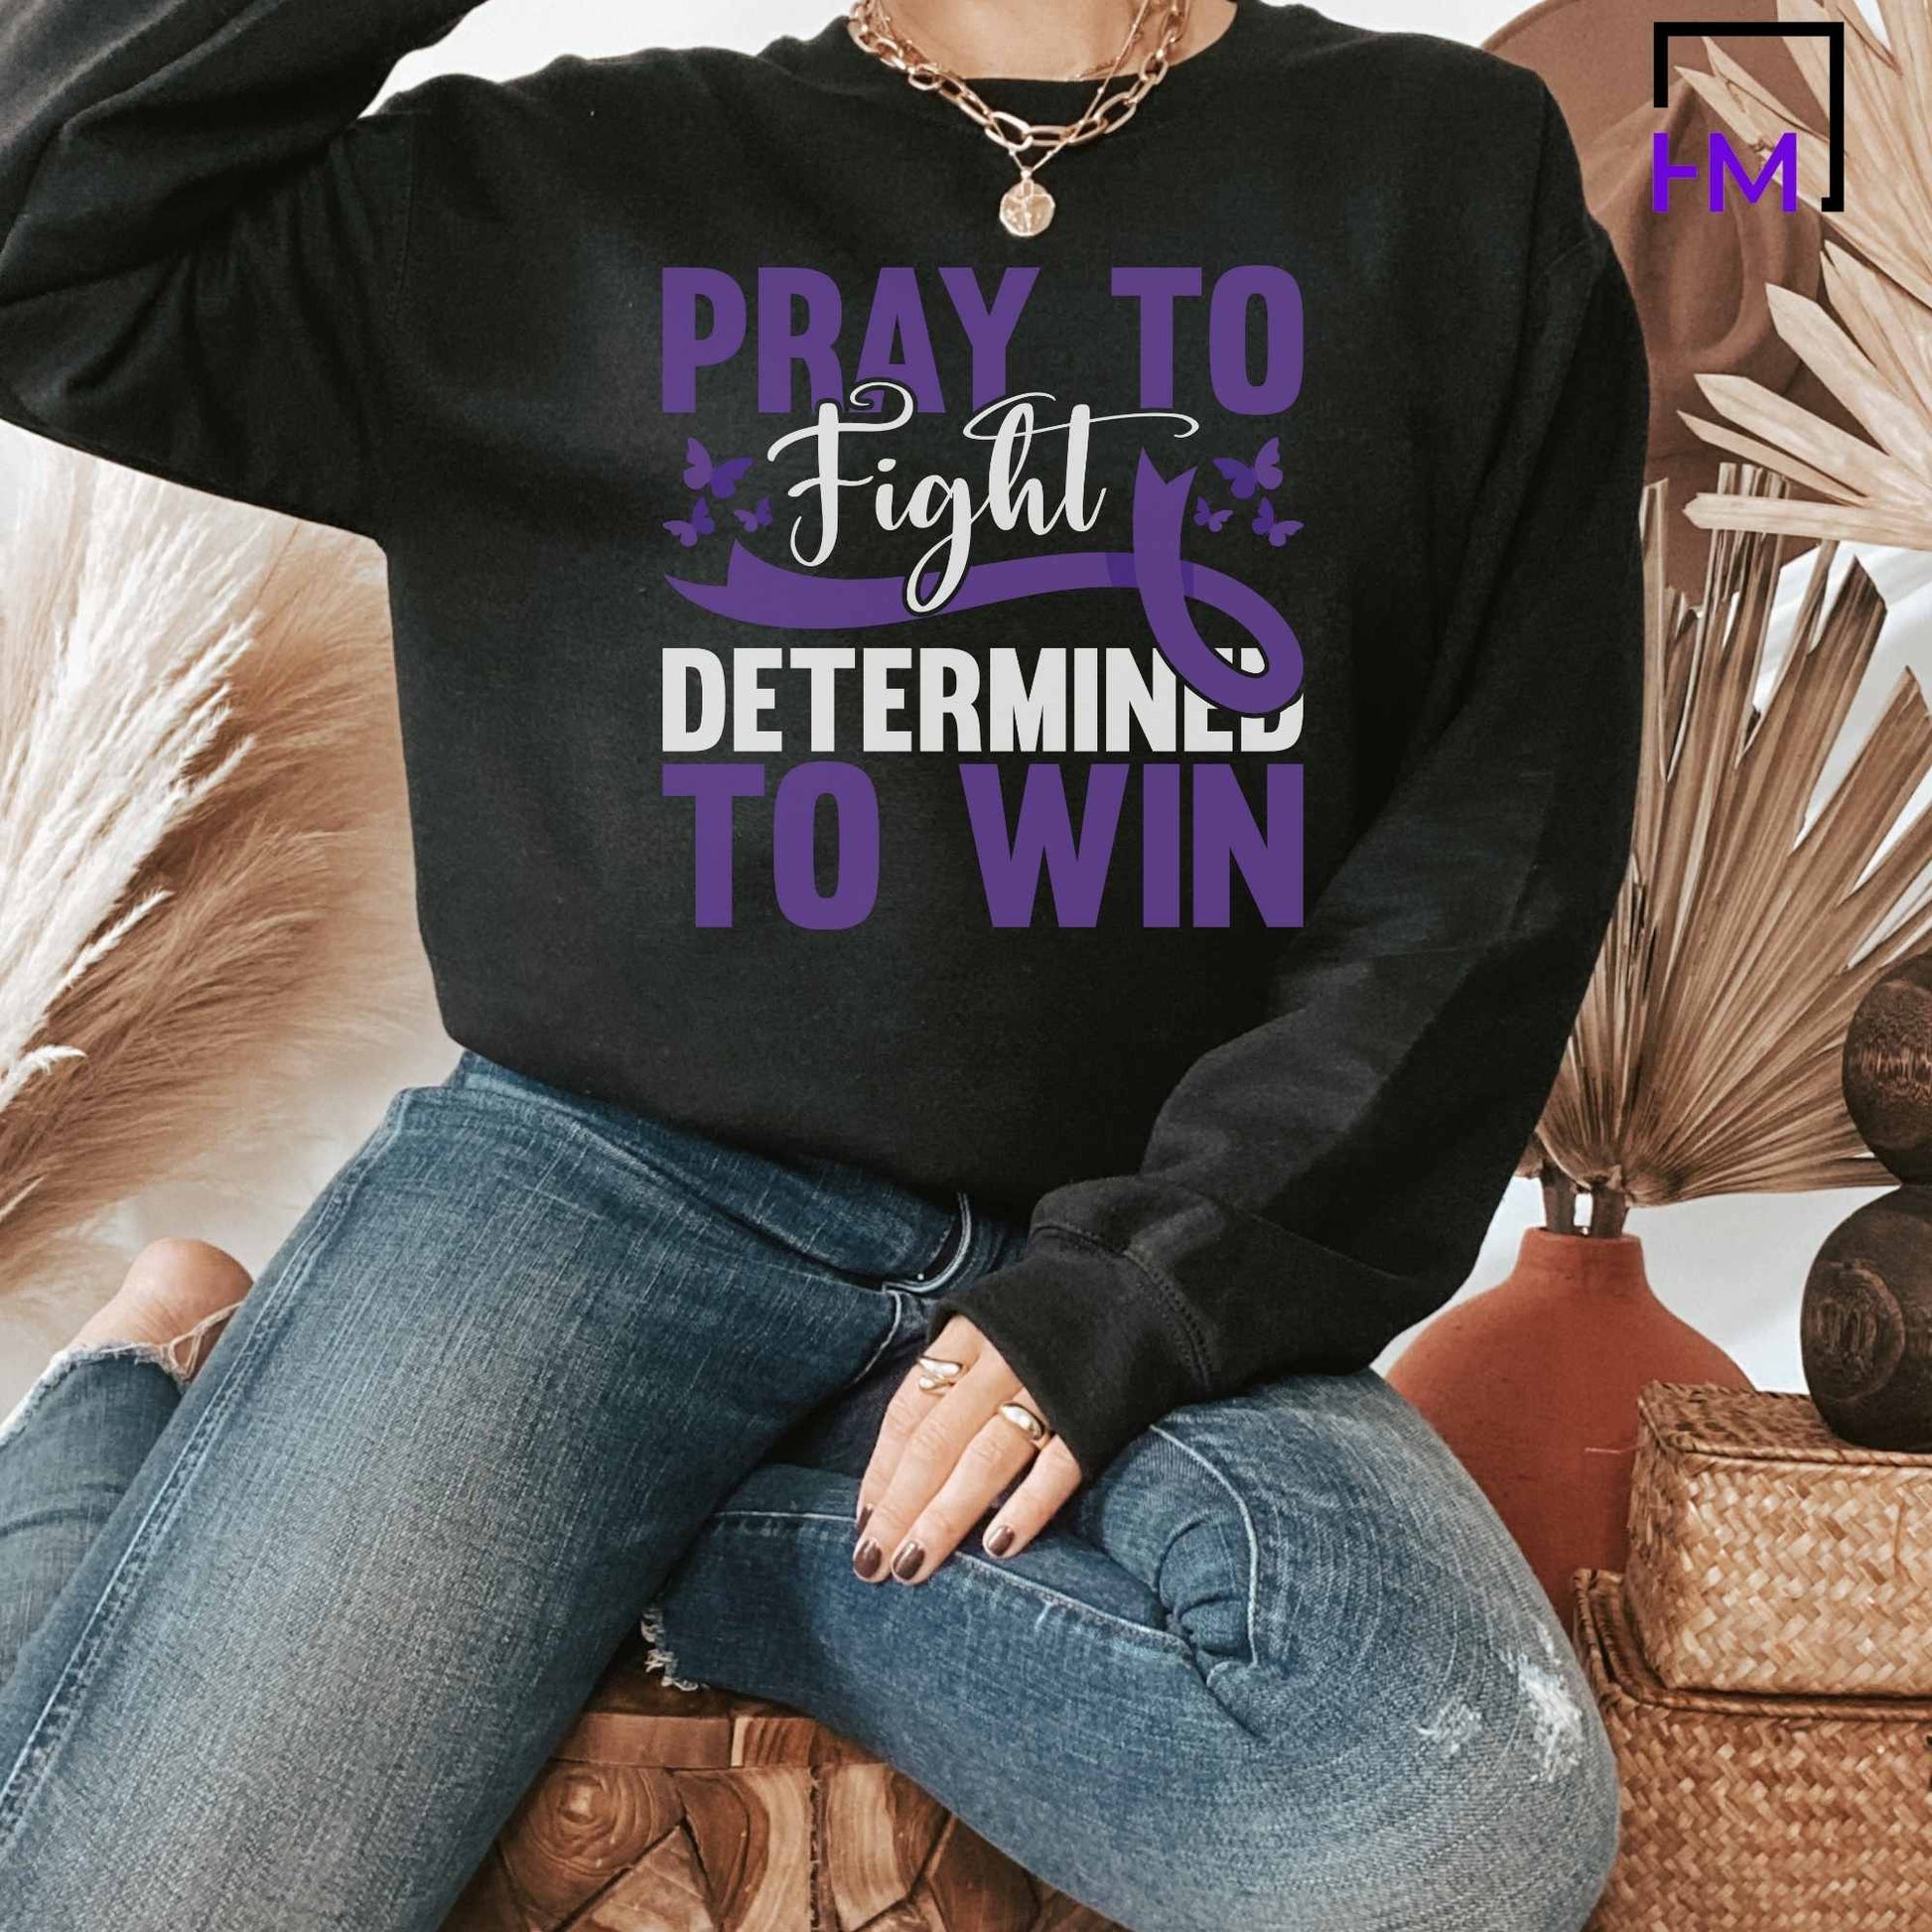 Pray to Fight, World Cancer Day Shirt, Breast Cancer Shirt, Never Give Up, Cancer Survivor Gifts, Stronger than Cancer Sweatshirt, Pink Ribbon Hoodie HMDesignStudioUS